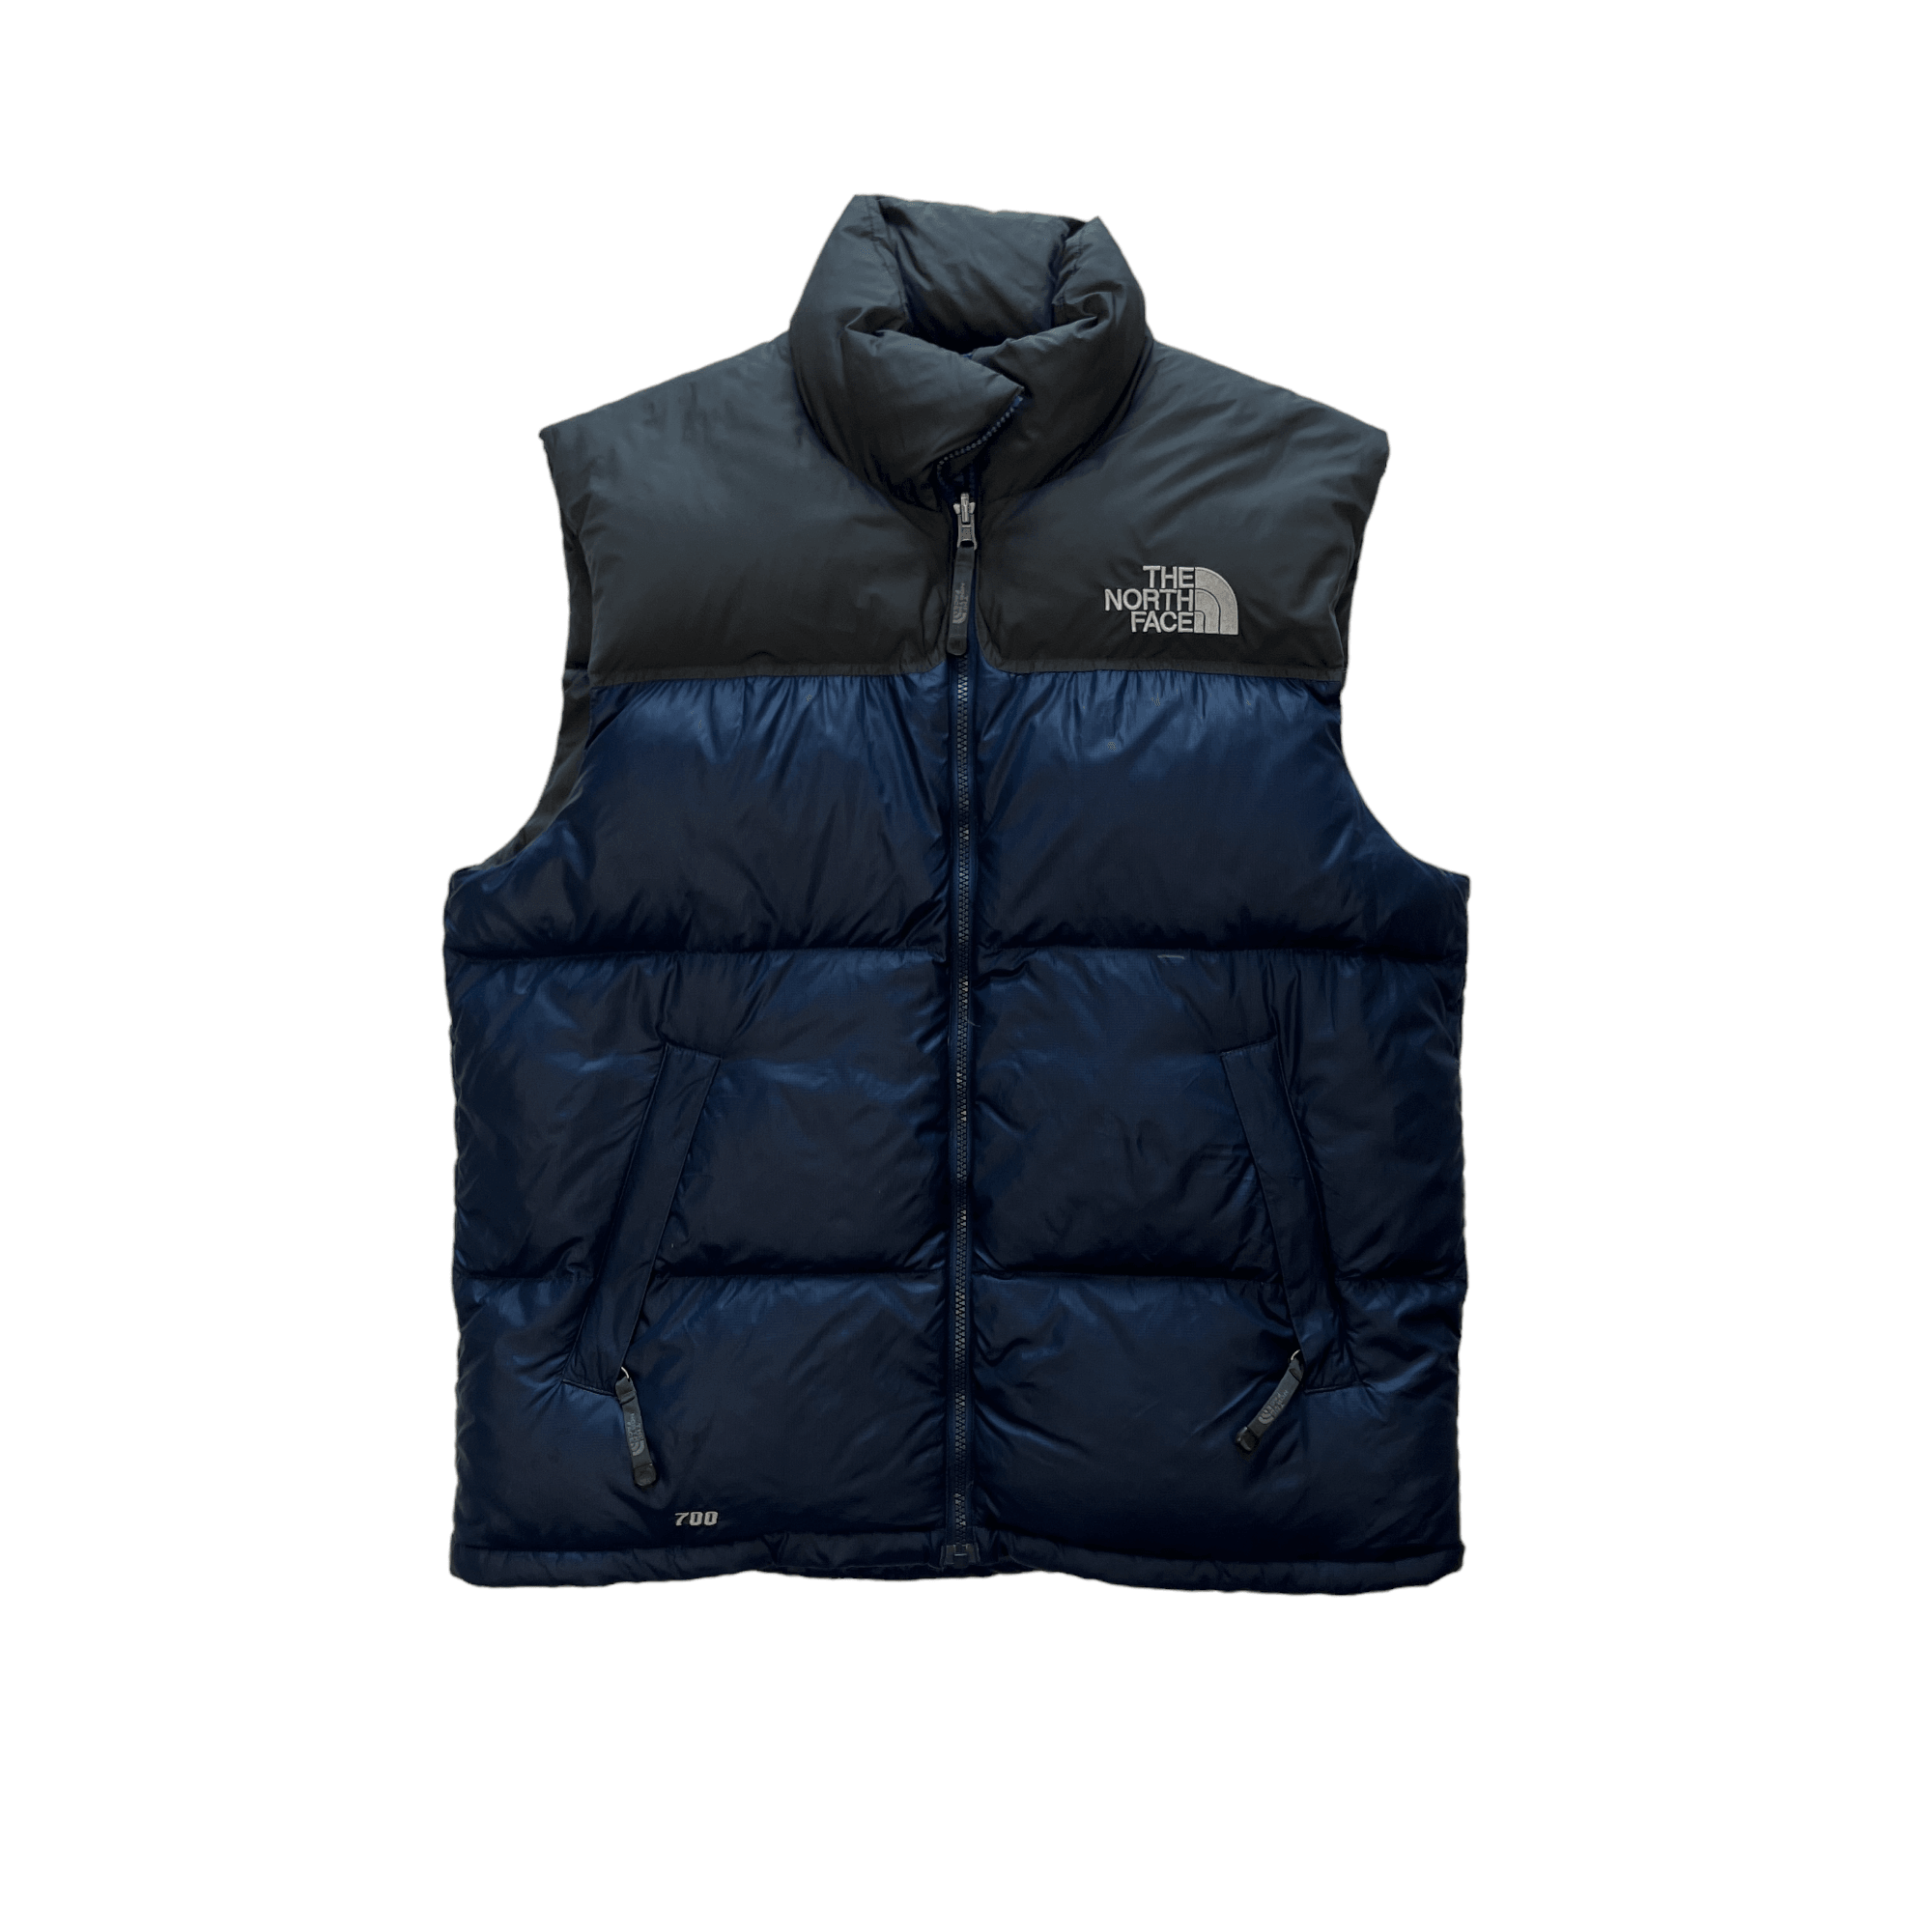 Vintage Blue + Grey The North Face (TNF) Puffer Gilet - Extra Large - The Streetwear Studio